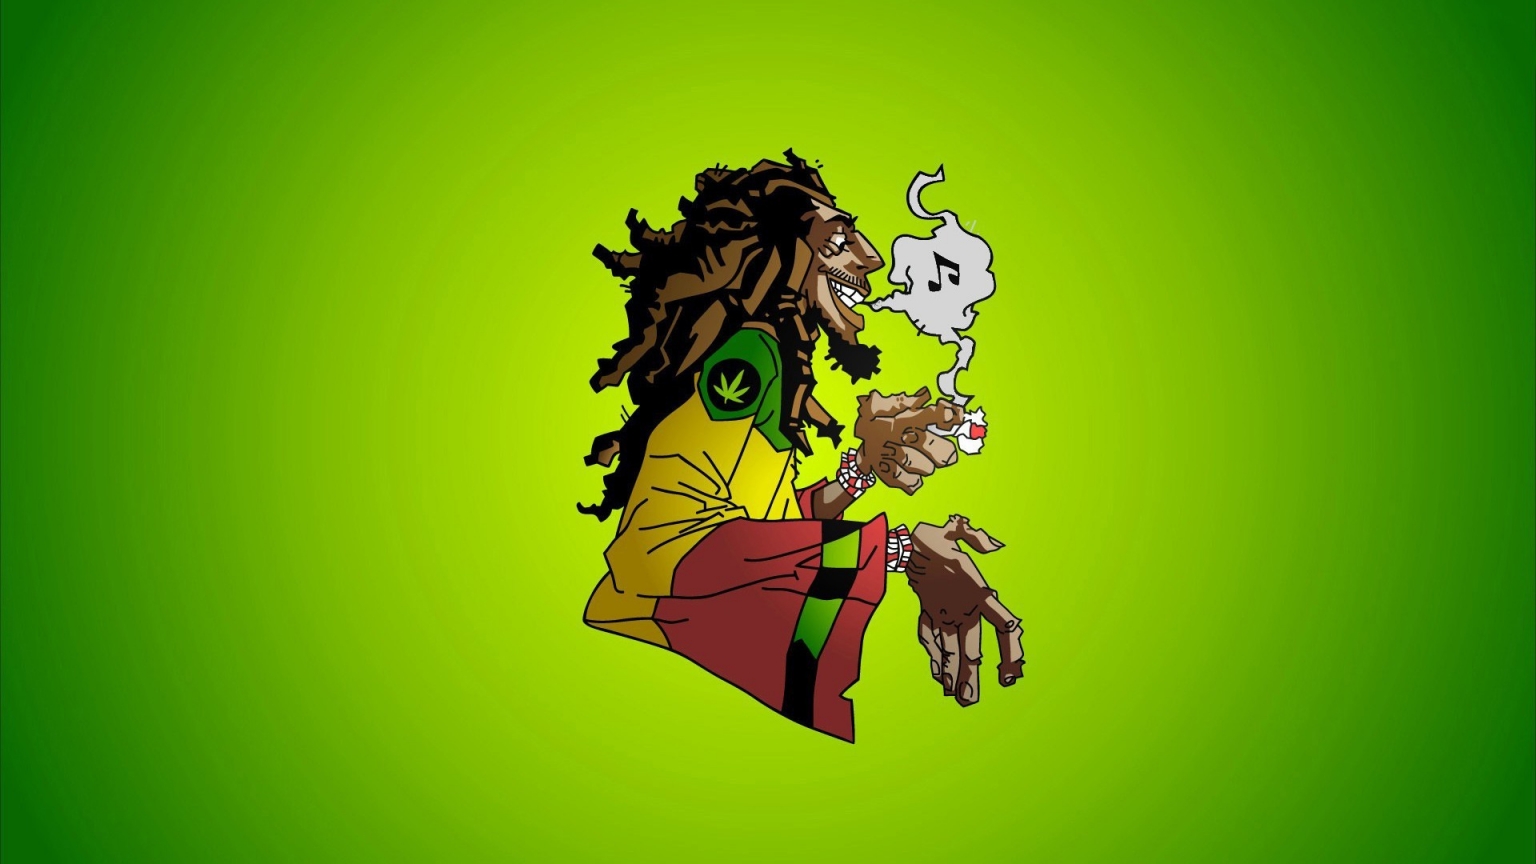 Bob Marley Caricature for 1536 x 864 HDTV resolution